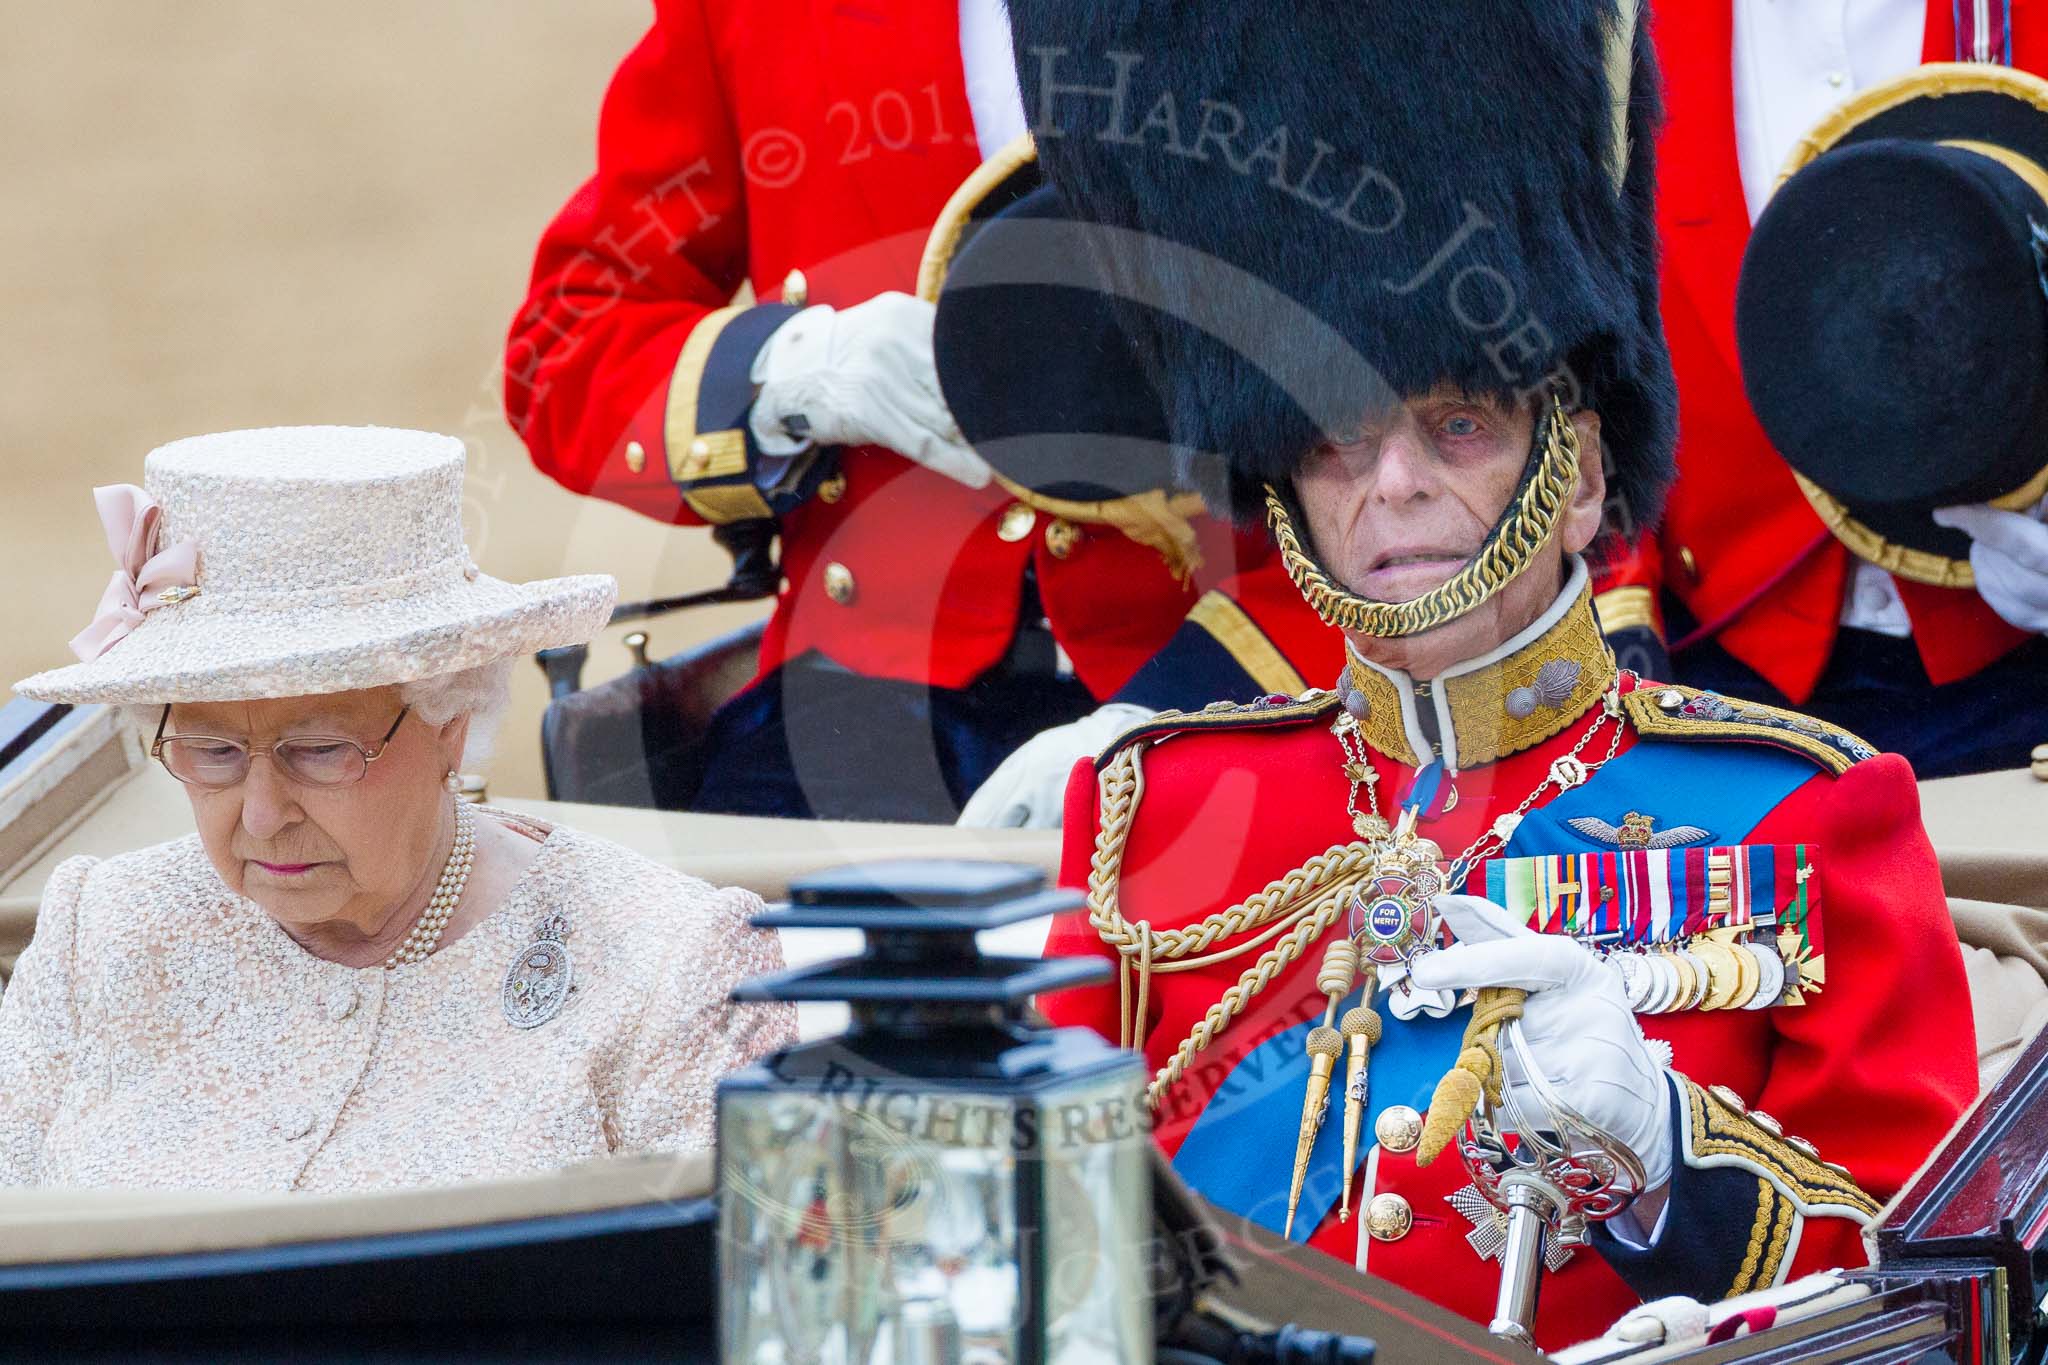 Trooping the Colour 2015. Image #652, 13 June 2015 12:08 Horse Guards Parade, London, UK